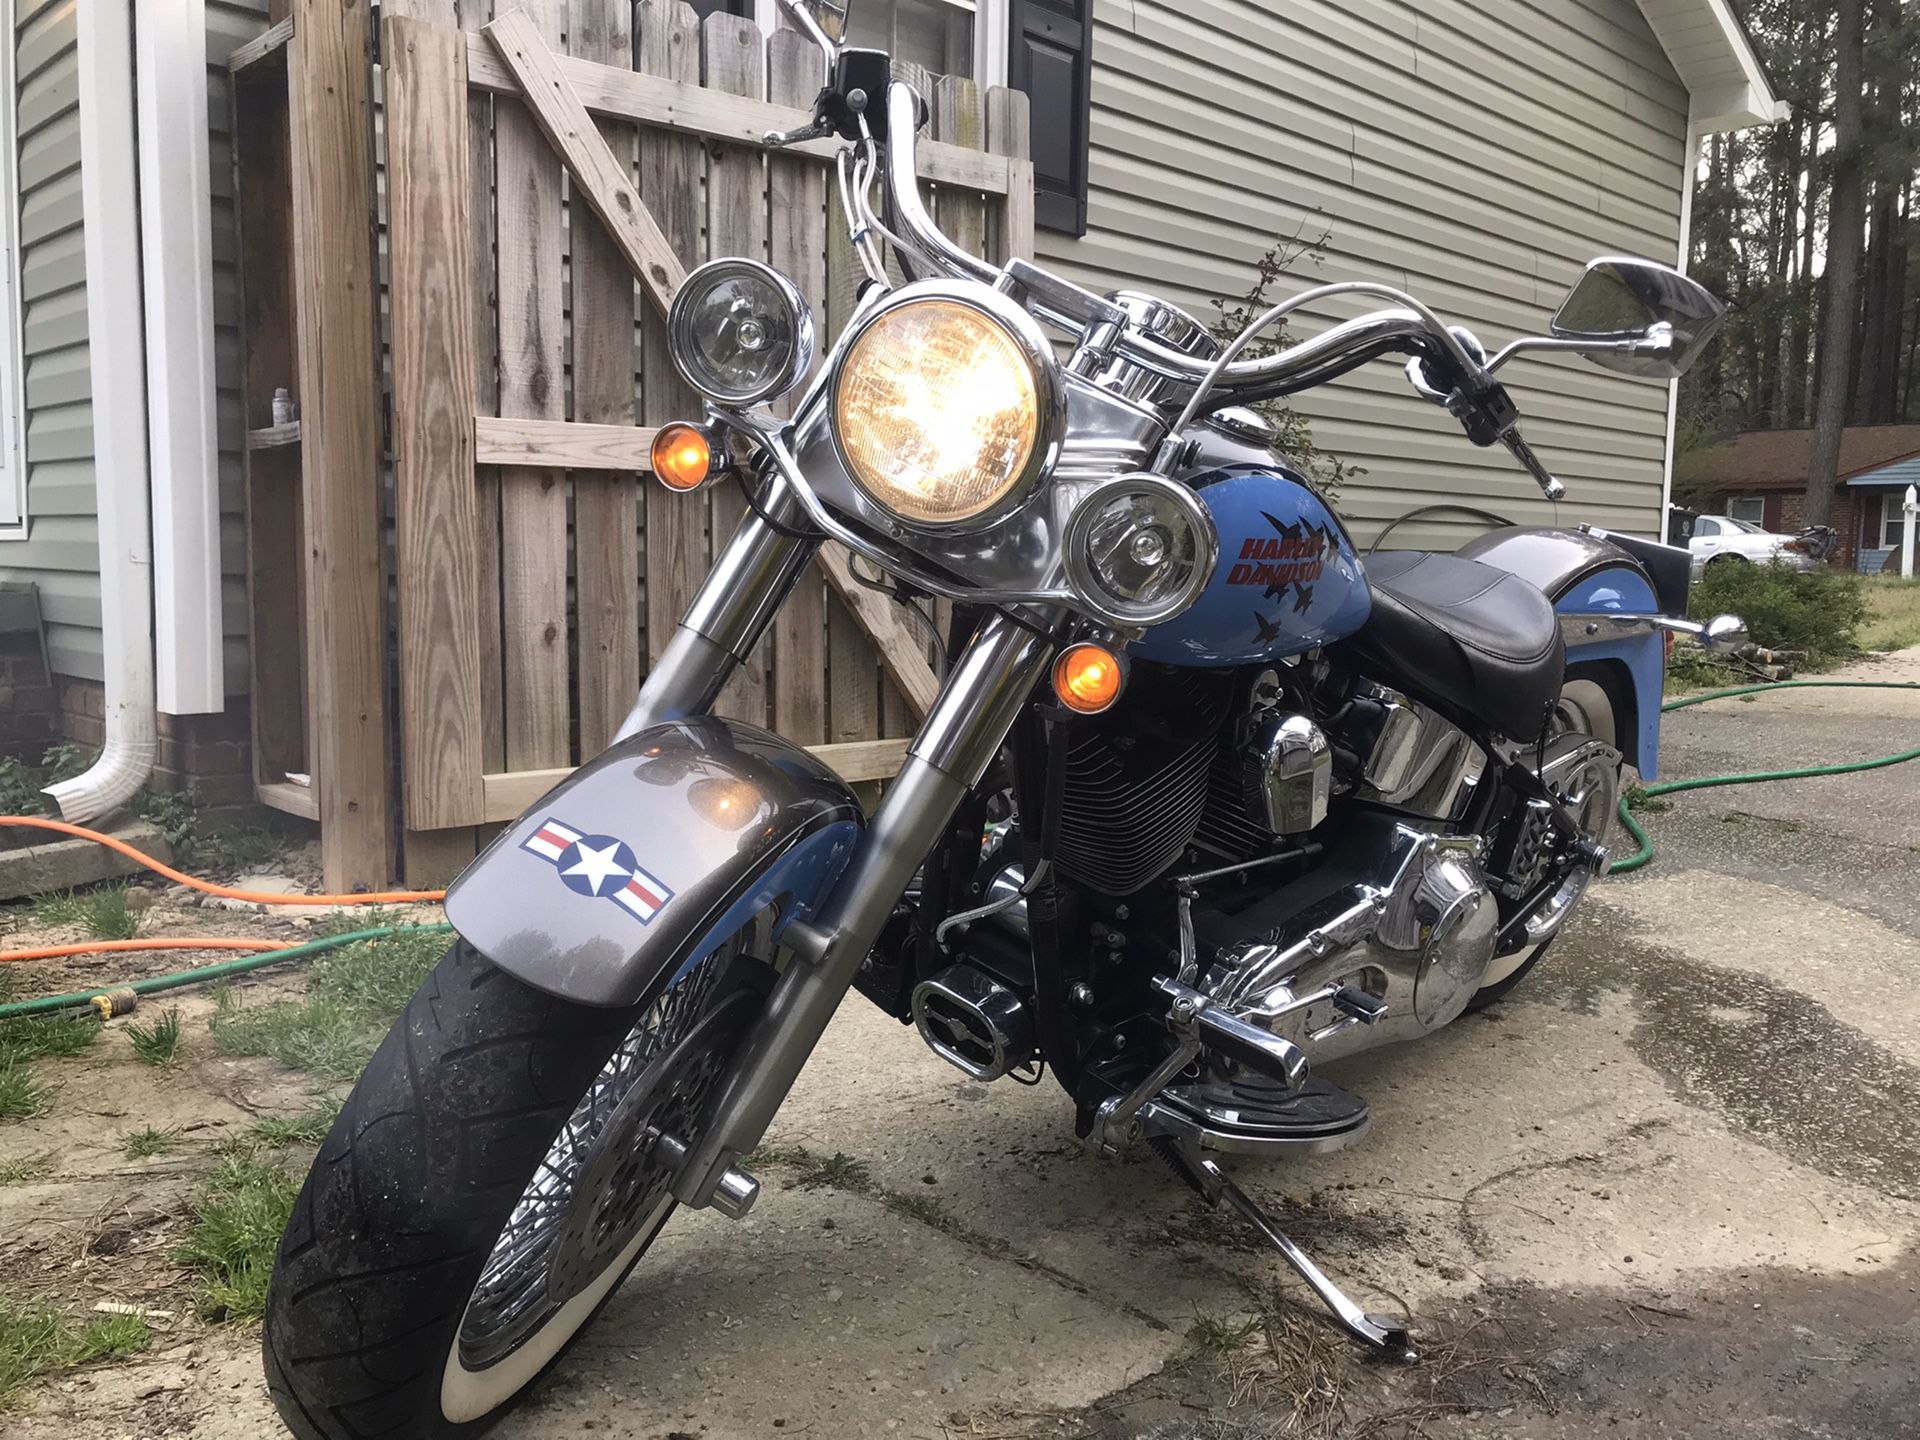 Selling,a really nice Harley cheap, less than 6k miles, a rare find, only 1000 with this military paint scheme by HD. This one is labeled #44.